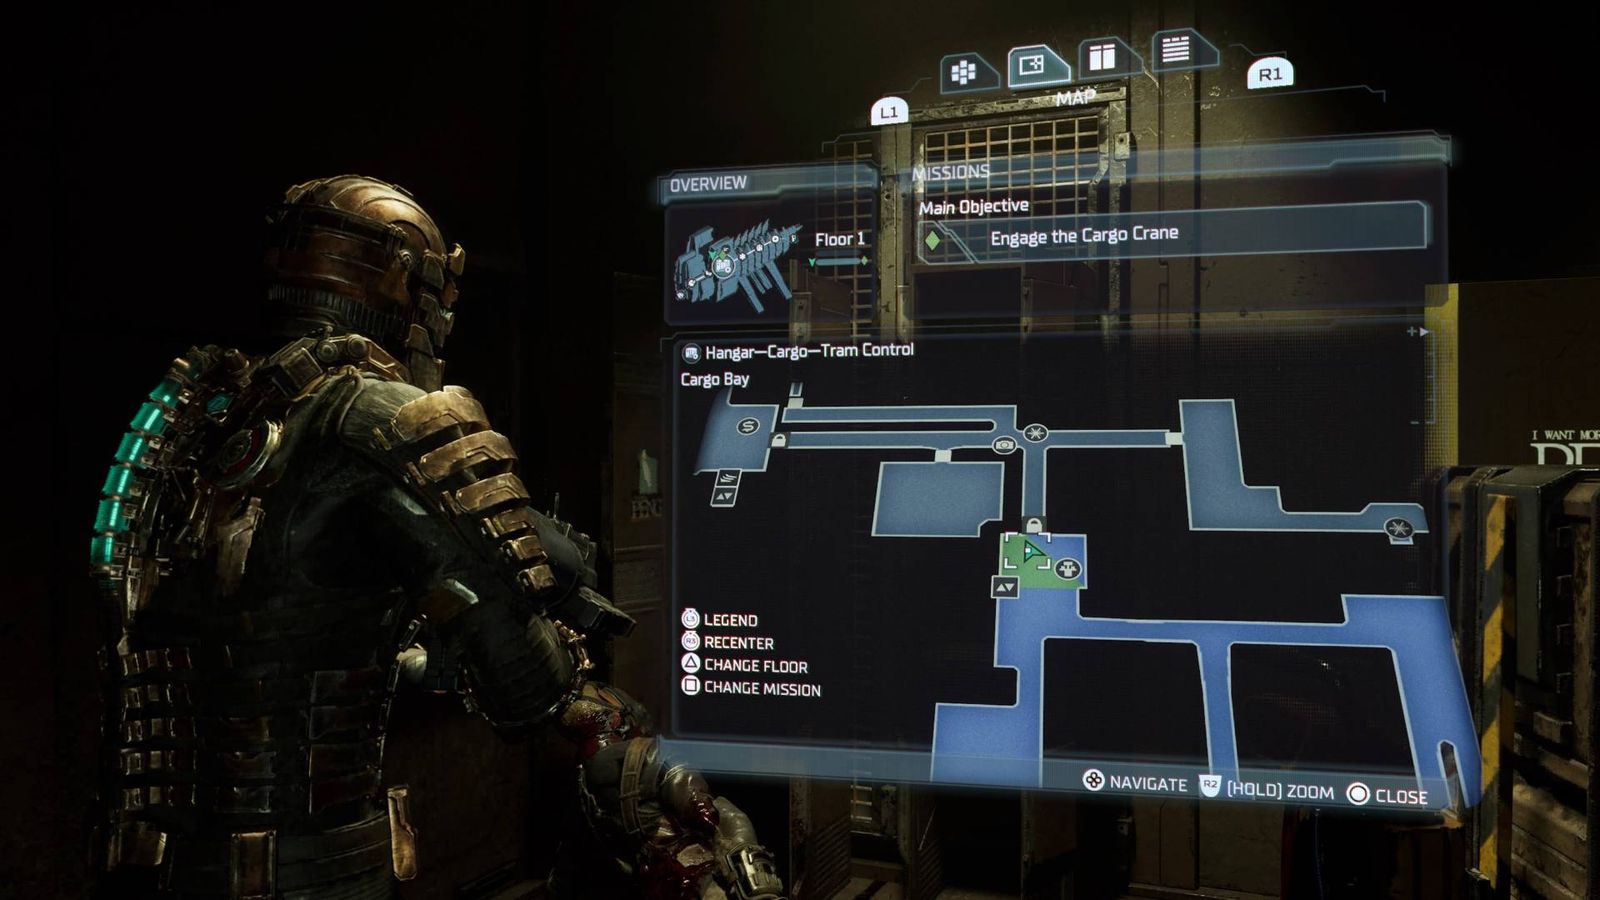 The map showing the Peng Treasure location in the Dead Space remake.